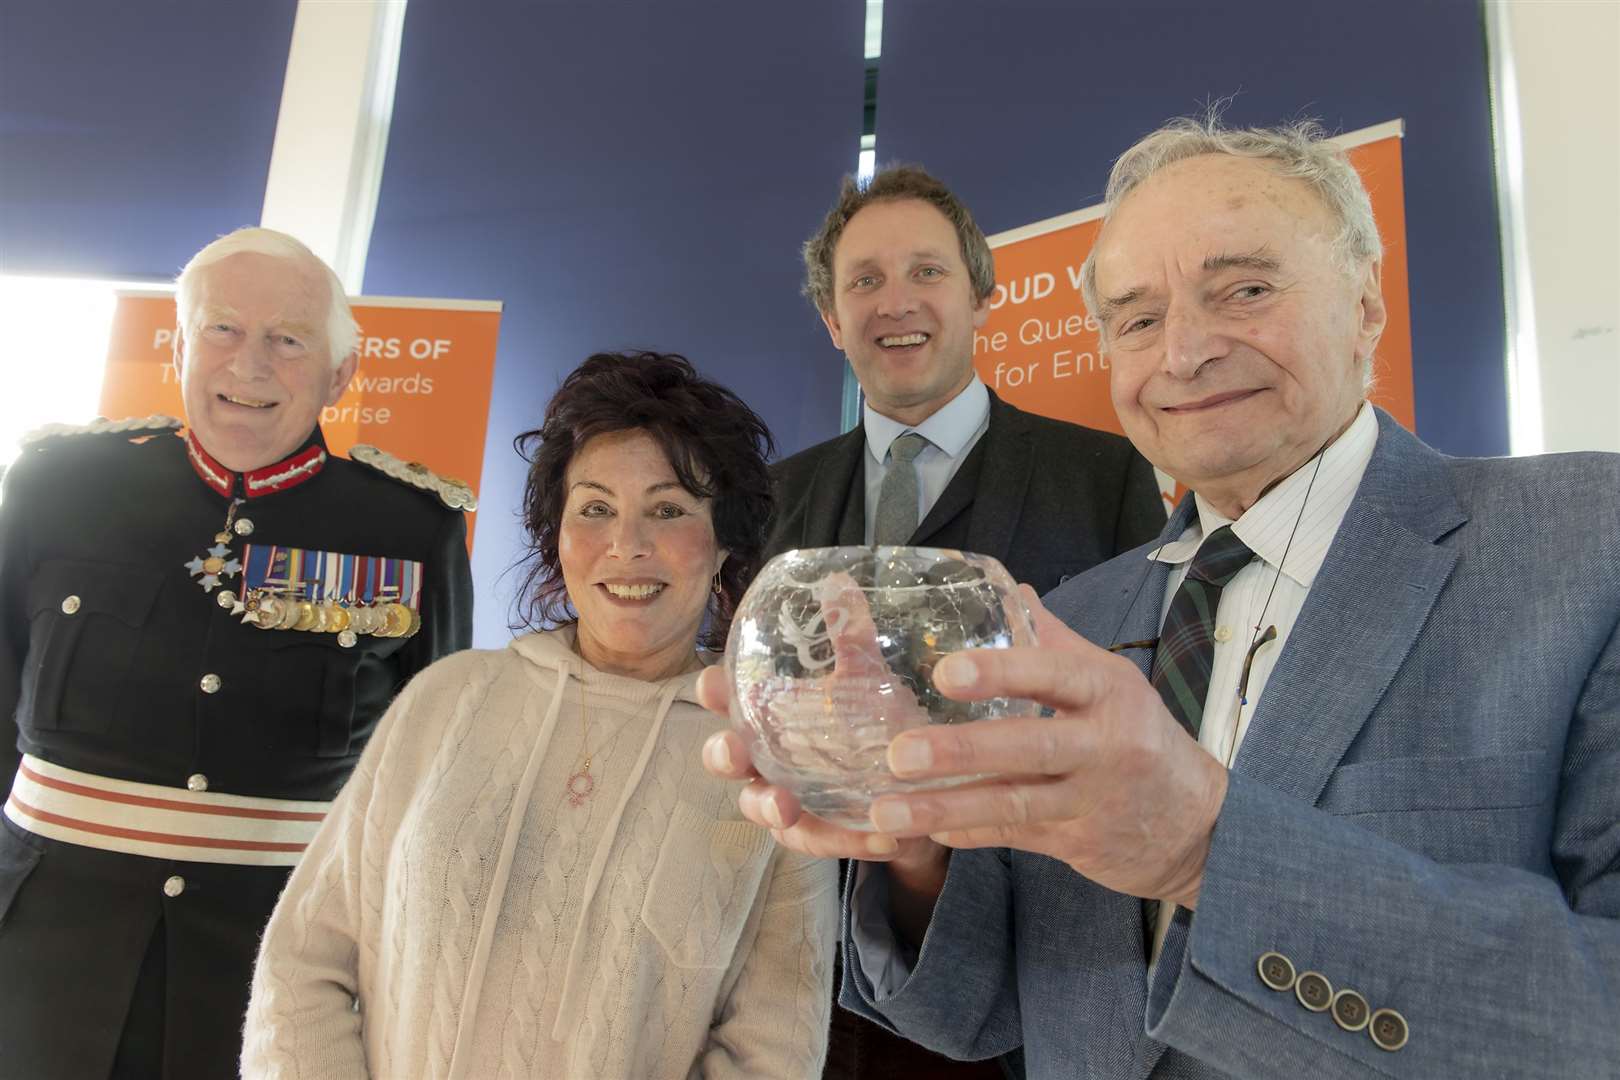 Lord-Lieutenant Seymour Monro, friend of AES Solar, comedian and TV presenter Ruby Wax, AES director Campbell MacLennan and MD George Goudsmit.